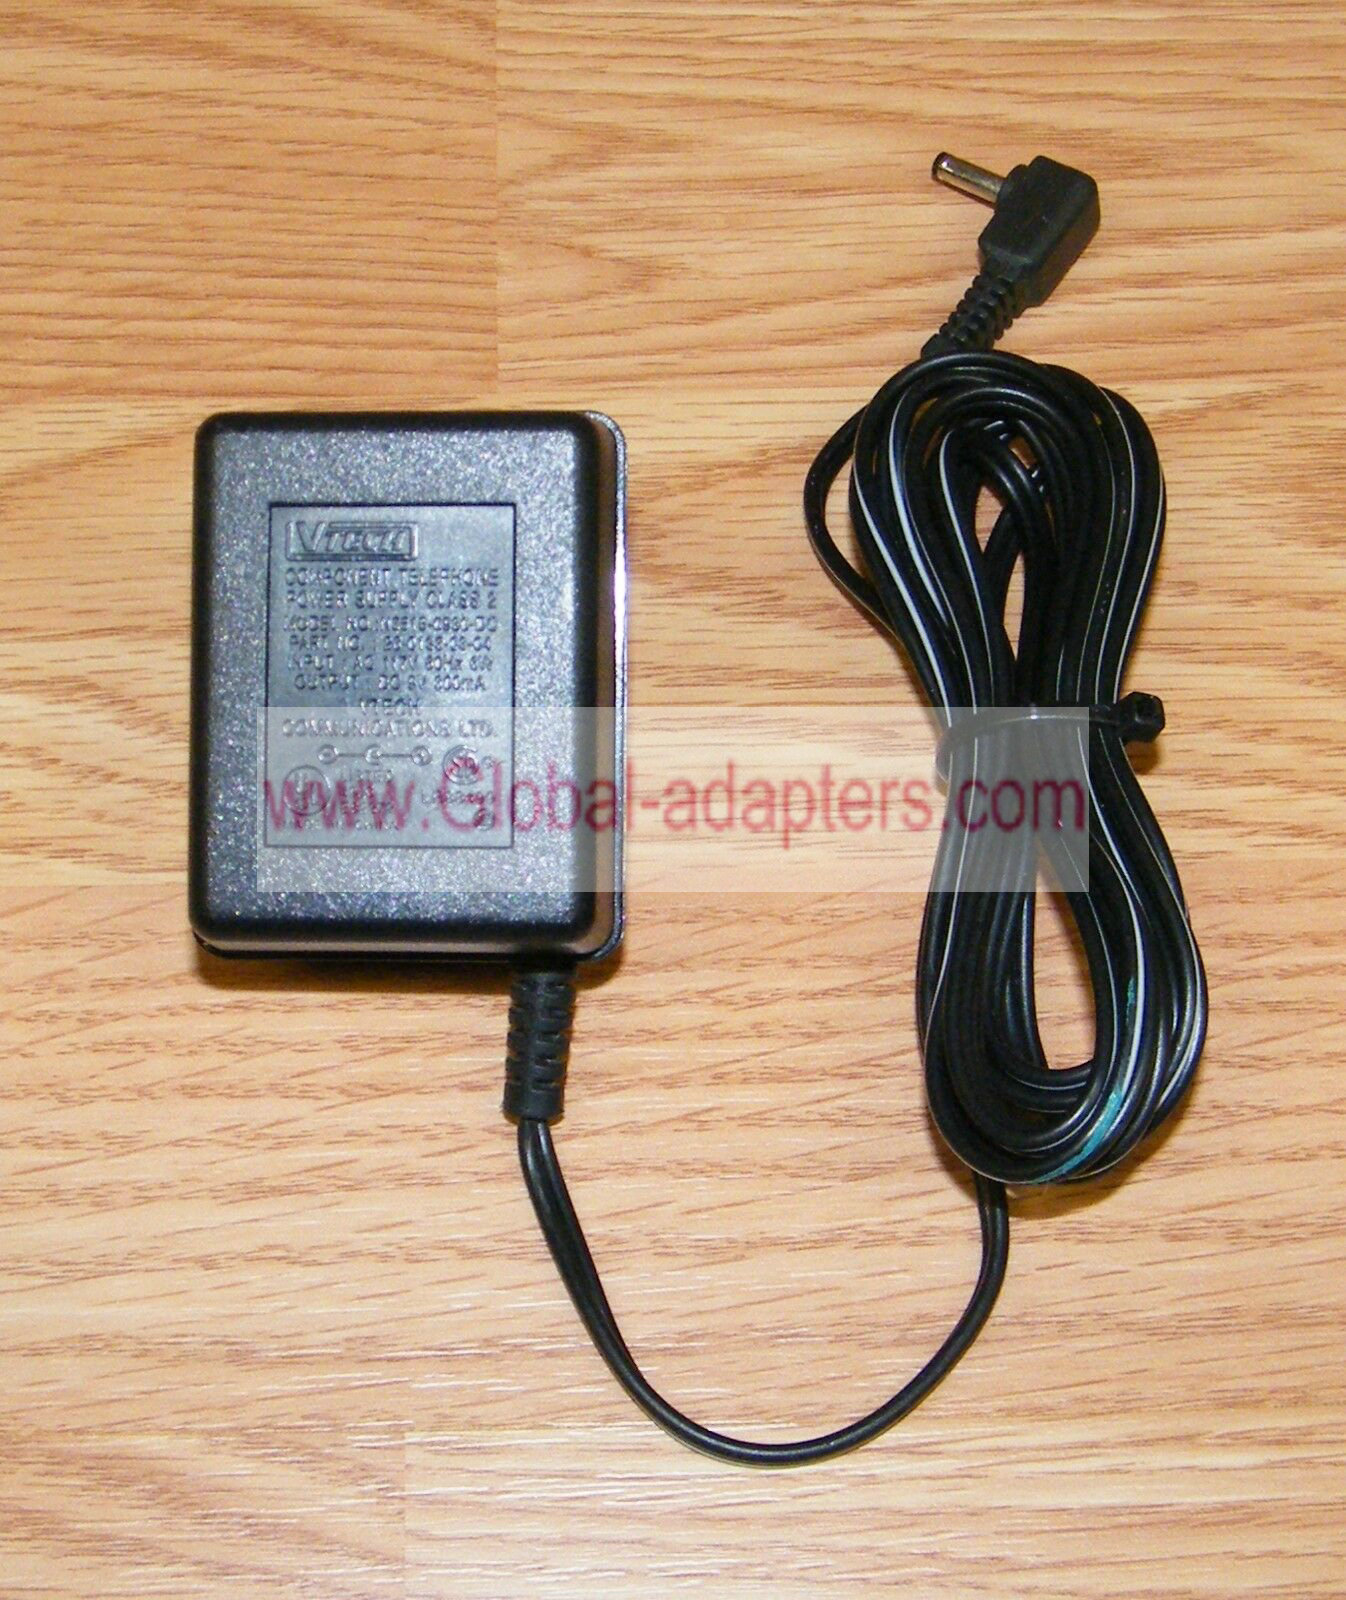 NEW Genuine 2 9V 300mA ac adapter for Vtech N3515-0930-DC Component Telephone Power Supply